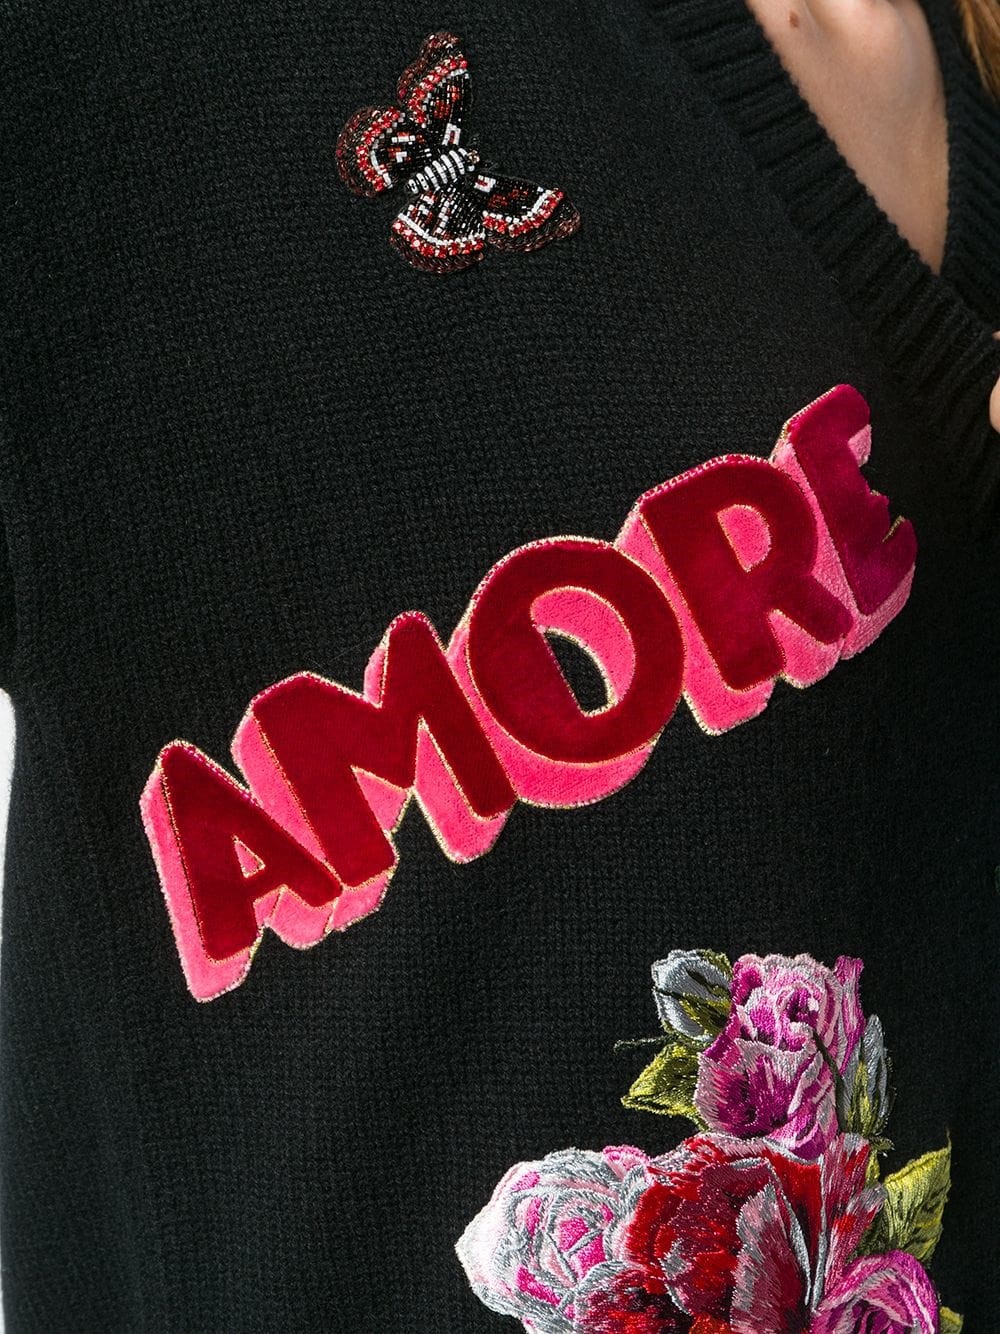 dolce & gabbana AMORE SWEATER available on montiboutique.com - 24789